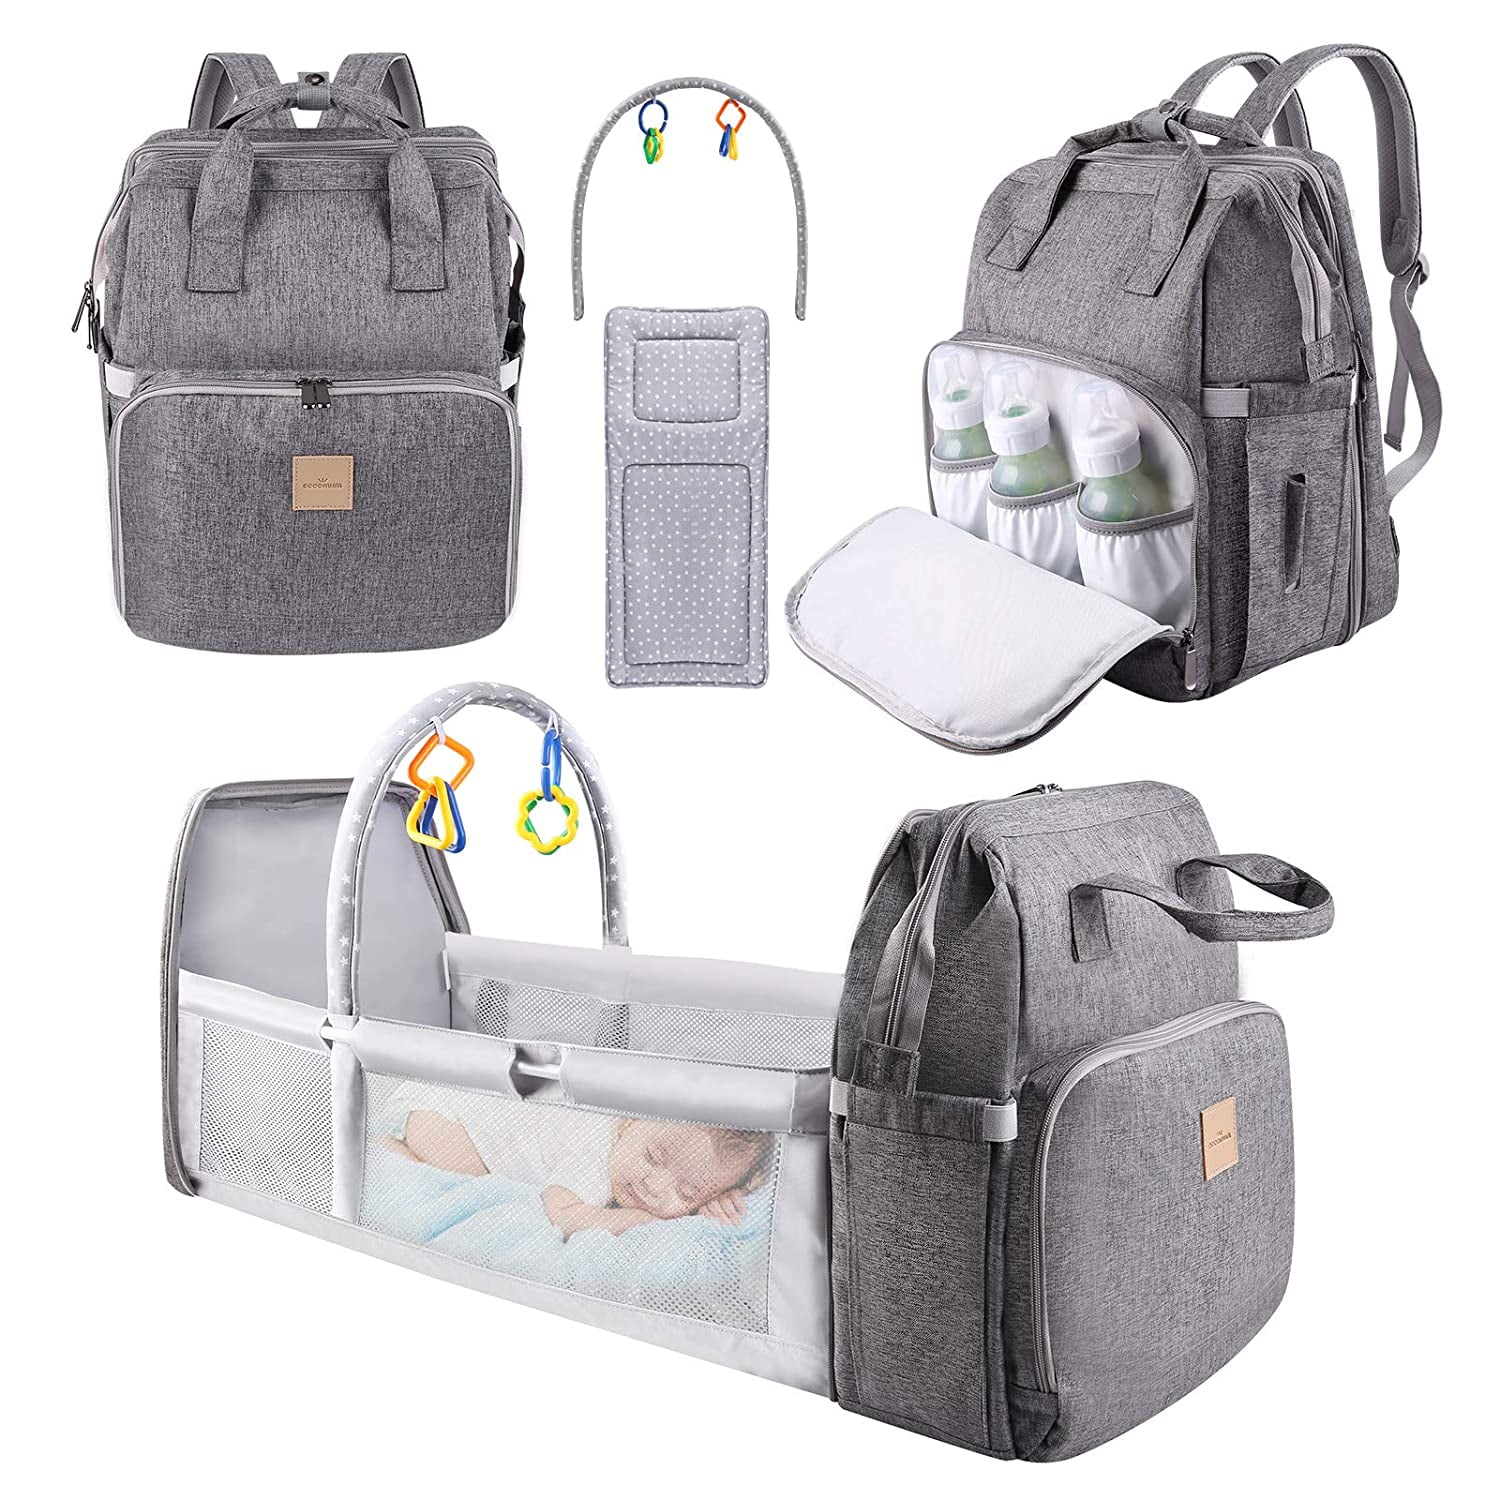 DEBUG Baby Bags for Boys Girls Stylish Diaper Bag with Stroller Straps and Insulated Pocket for Dad Mom Diaper Bag Backpack Grey Large Waterproof Travel Back Pack Diaper Bag with Changing Pad